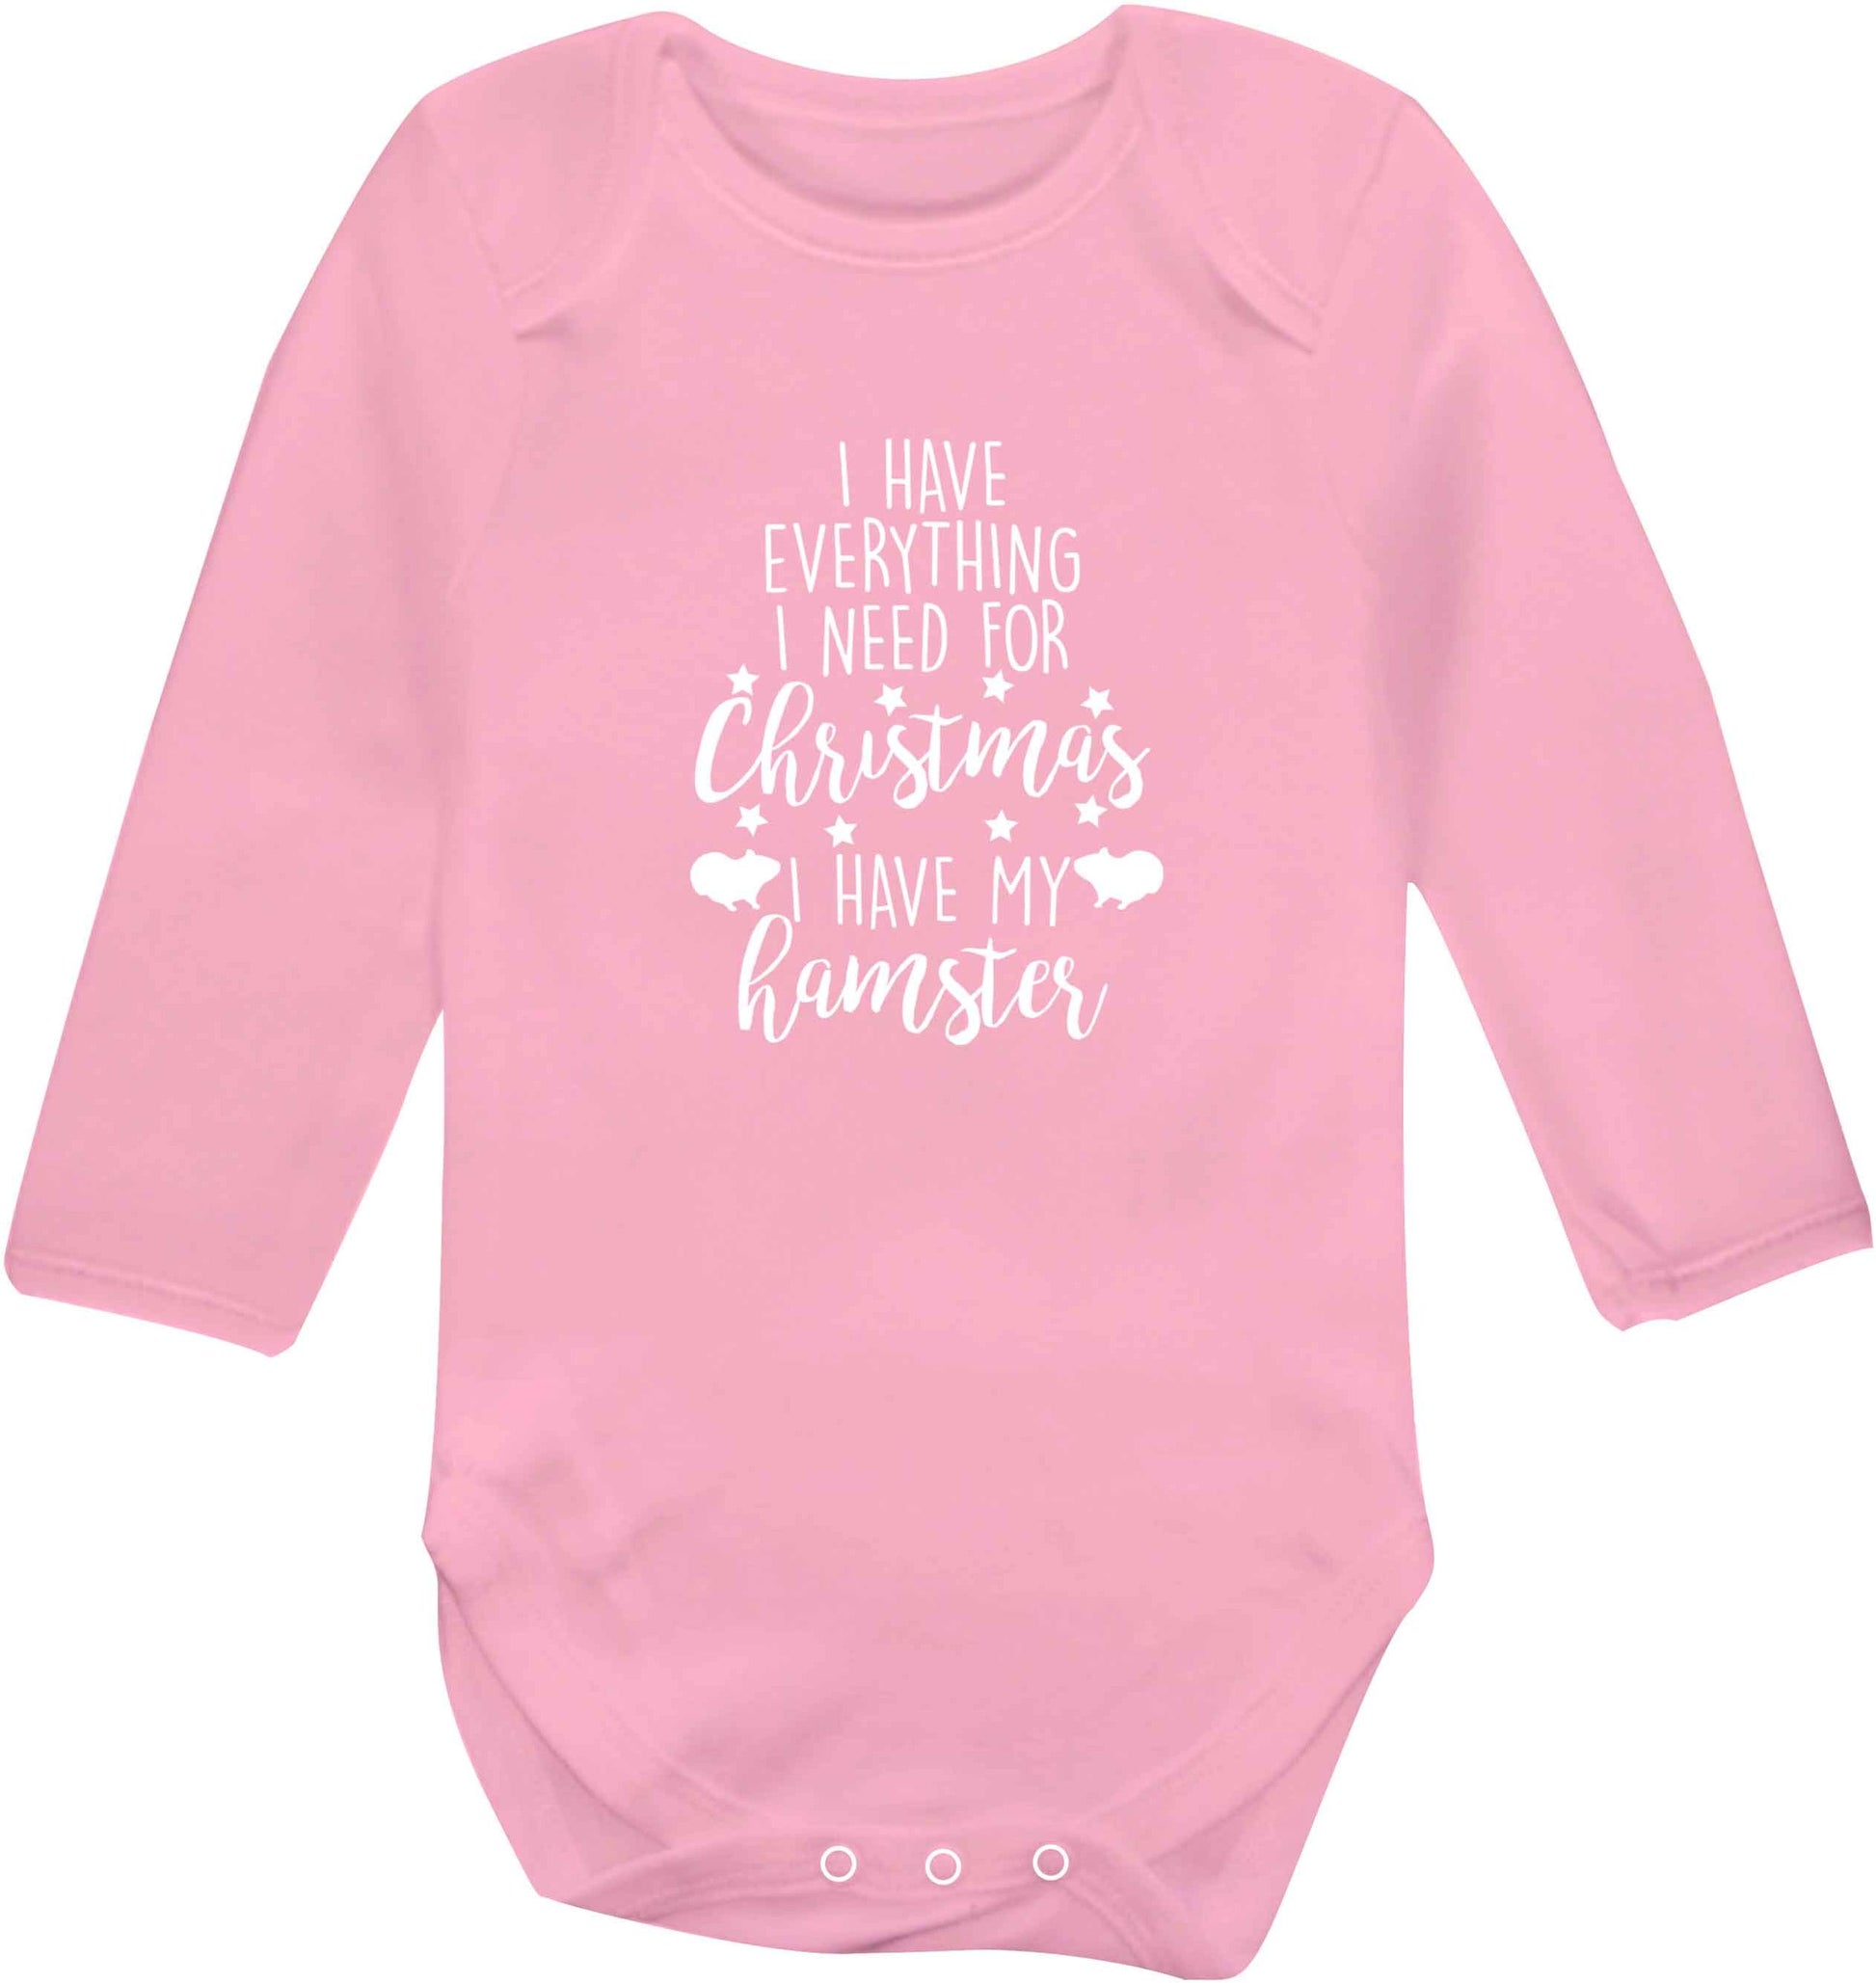 I have everything I need for Christmas I have my hamster baby vest long sleeved pale pink 6-12 months